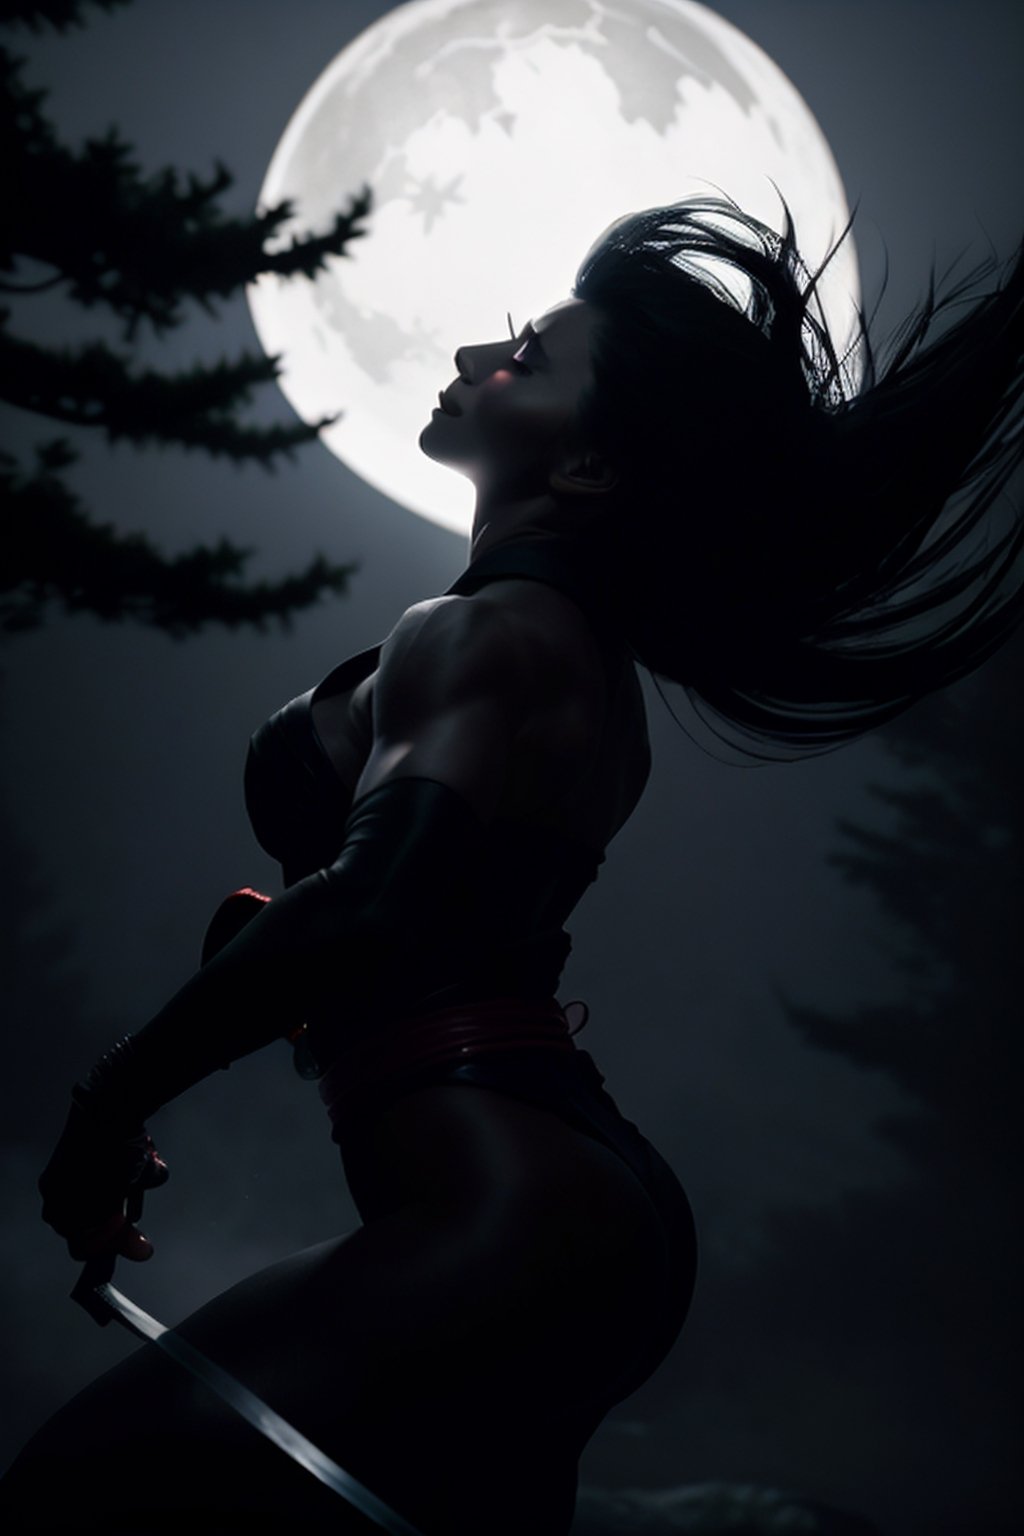 (best quality,4k,highres,masterpiece:1.2),ultra-detailed,(realistic:1.37),night,black-clad kunoichi emerging from darkness with ((numerous scars)),stealthily dancing shadows,deadly silent,eyes gleaming with determination,strong physique,powerful presence,vivid colors,dynamic composition,sharp focus,nighttime ambiance,subtle moonlight filtering through the trees,aura of mystery and danger,high contrast lighting,striking pose,fierce expression,her weapon of choice: a shining katana,whirling winds of the night,flowing hair,deft movements,flawless agility,exquisite attention to detail,dark silhouette against the night sky,perfect harmony of strength and grace,intense atmosphere,background featuring an ancient Japanese temple shrouded in mist,an air of ancient legends and tales,majestic cherry blossom trees,faces of past ninja warriors etched on the walls,an homage to a rich history,secretive mission,unseen enemies lurking in the shadows,a thrilling adventure waiting to unfold.